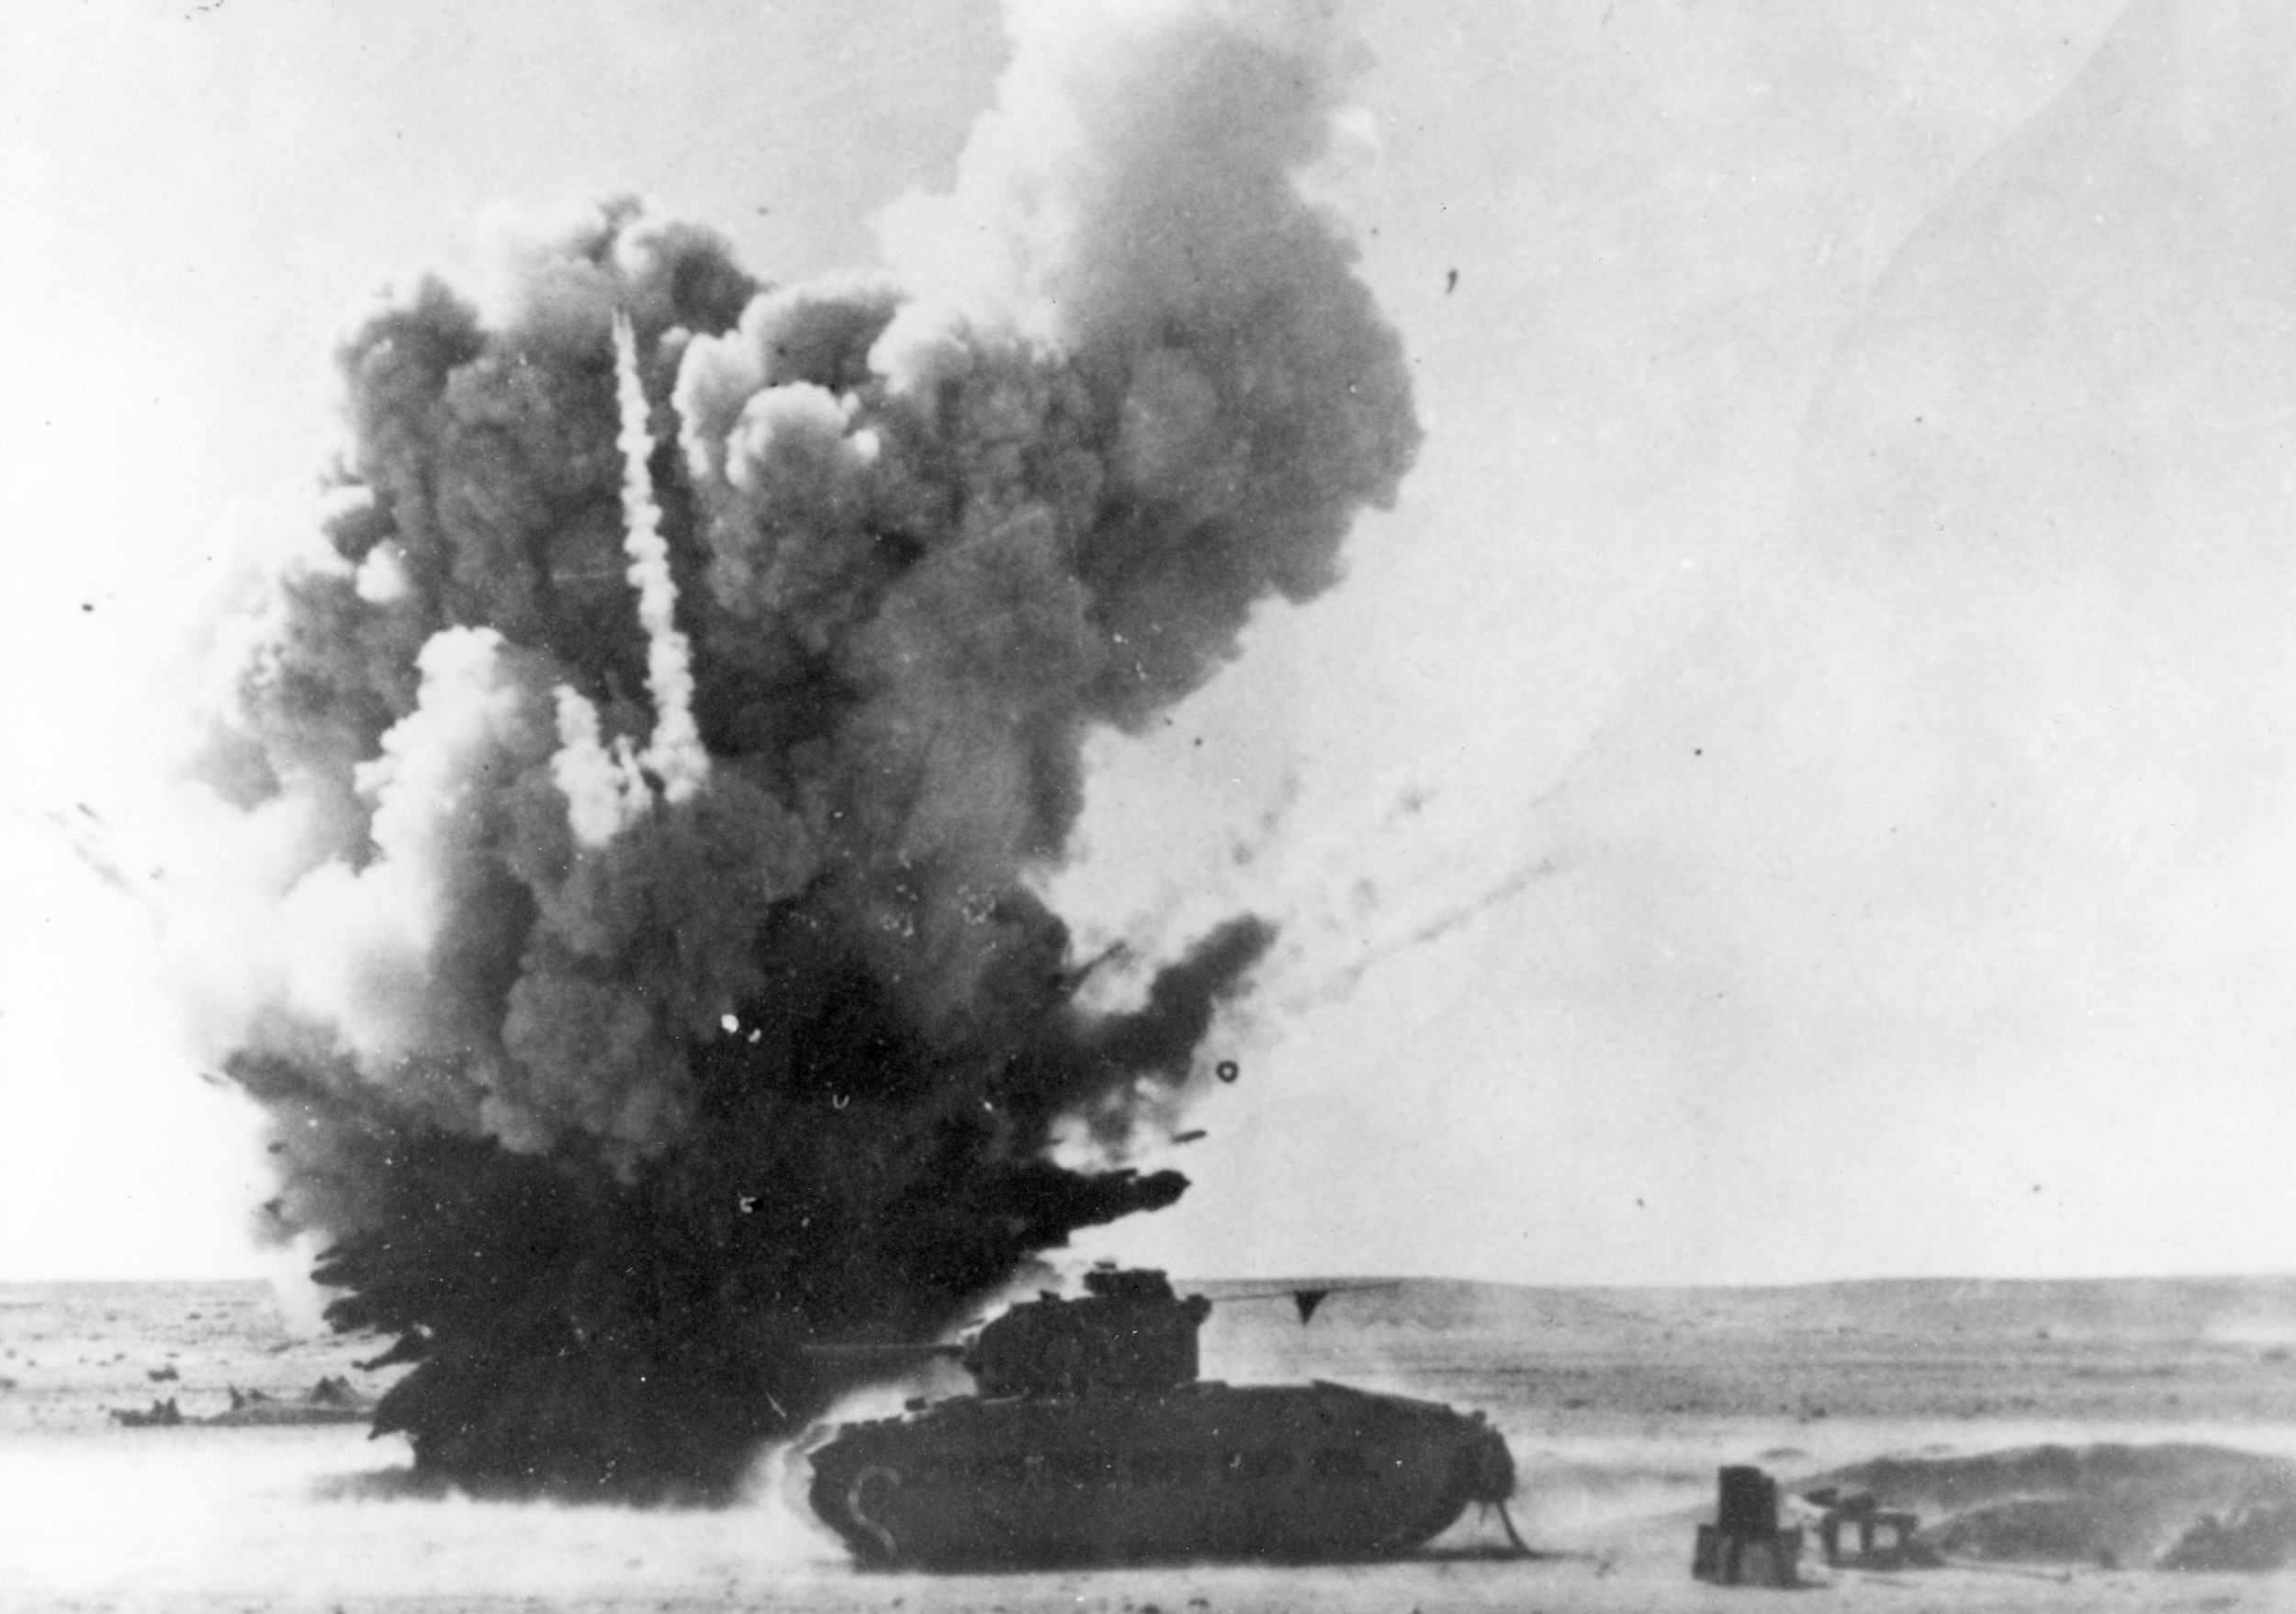 A near miss from an Axis bomb showers a British Matilda tank with shrapnel and debris at Sidi Barrani. The British victory at Sidi Barrani in December 1940 marked the beginning of the three-year struggle for supremacy in North Africa.